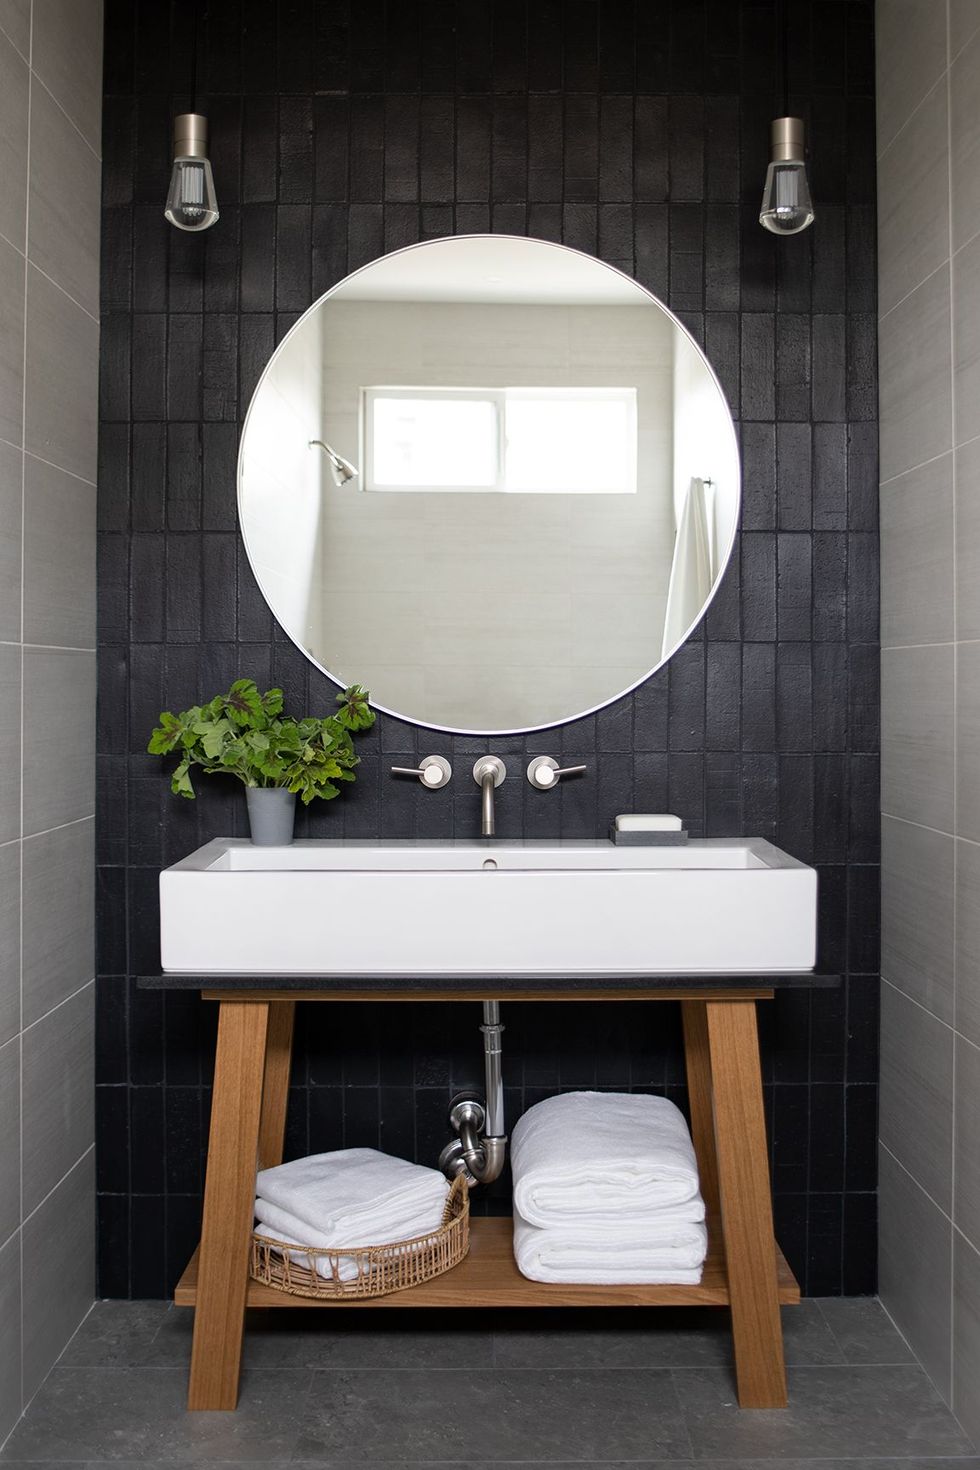 Here's a few bathroom 2023 trend prediction by the pros! What do